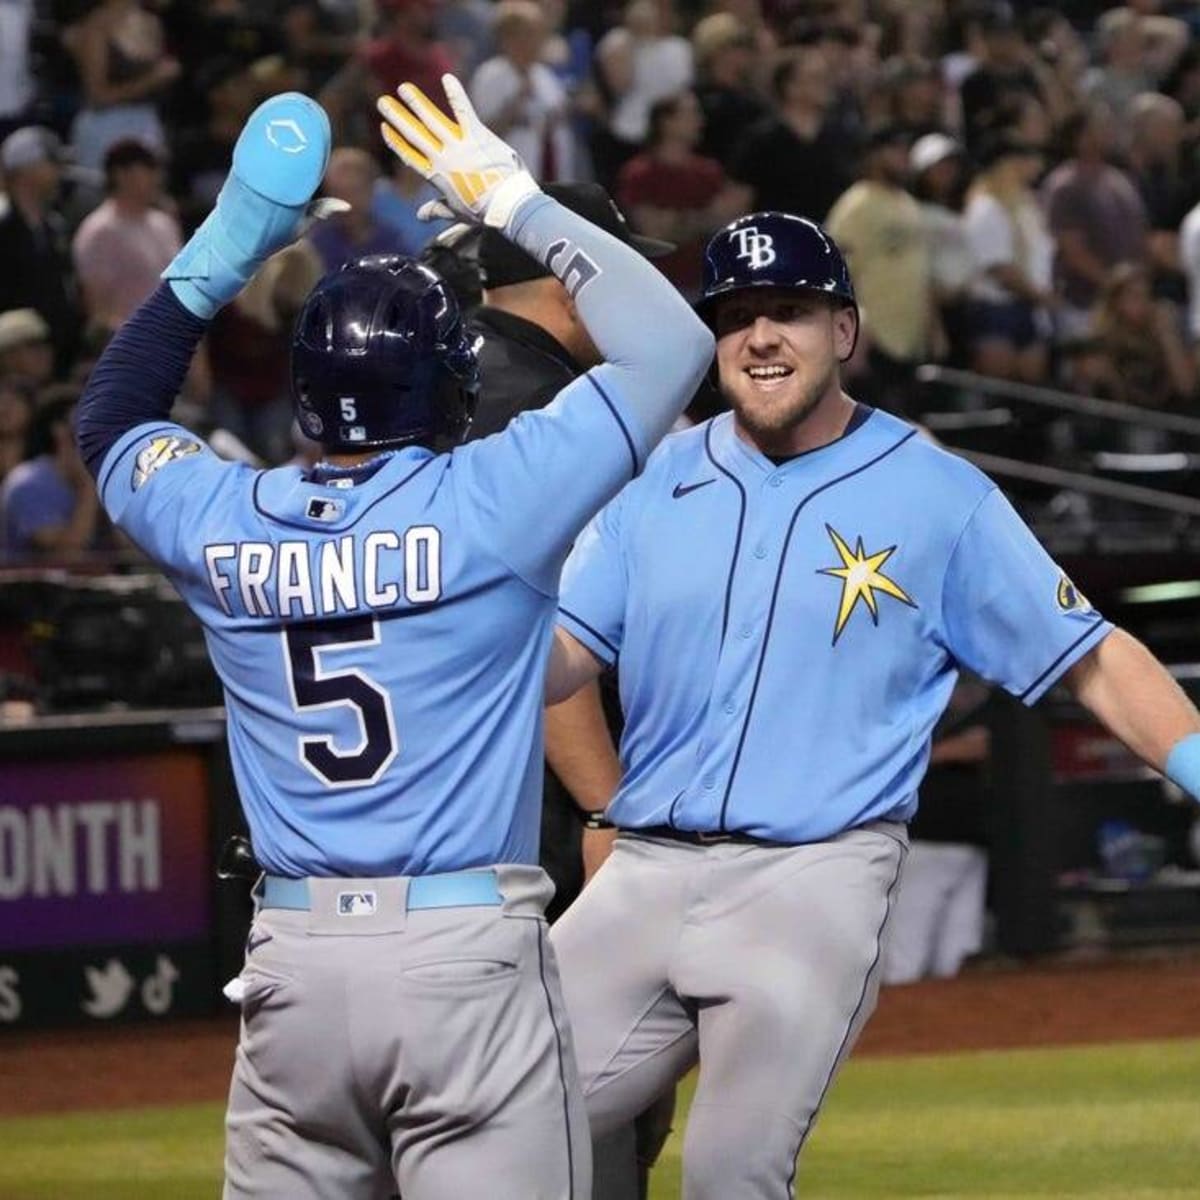 tampa bay rays blue uniforms